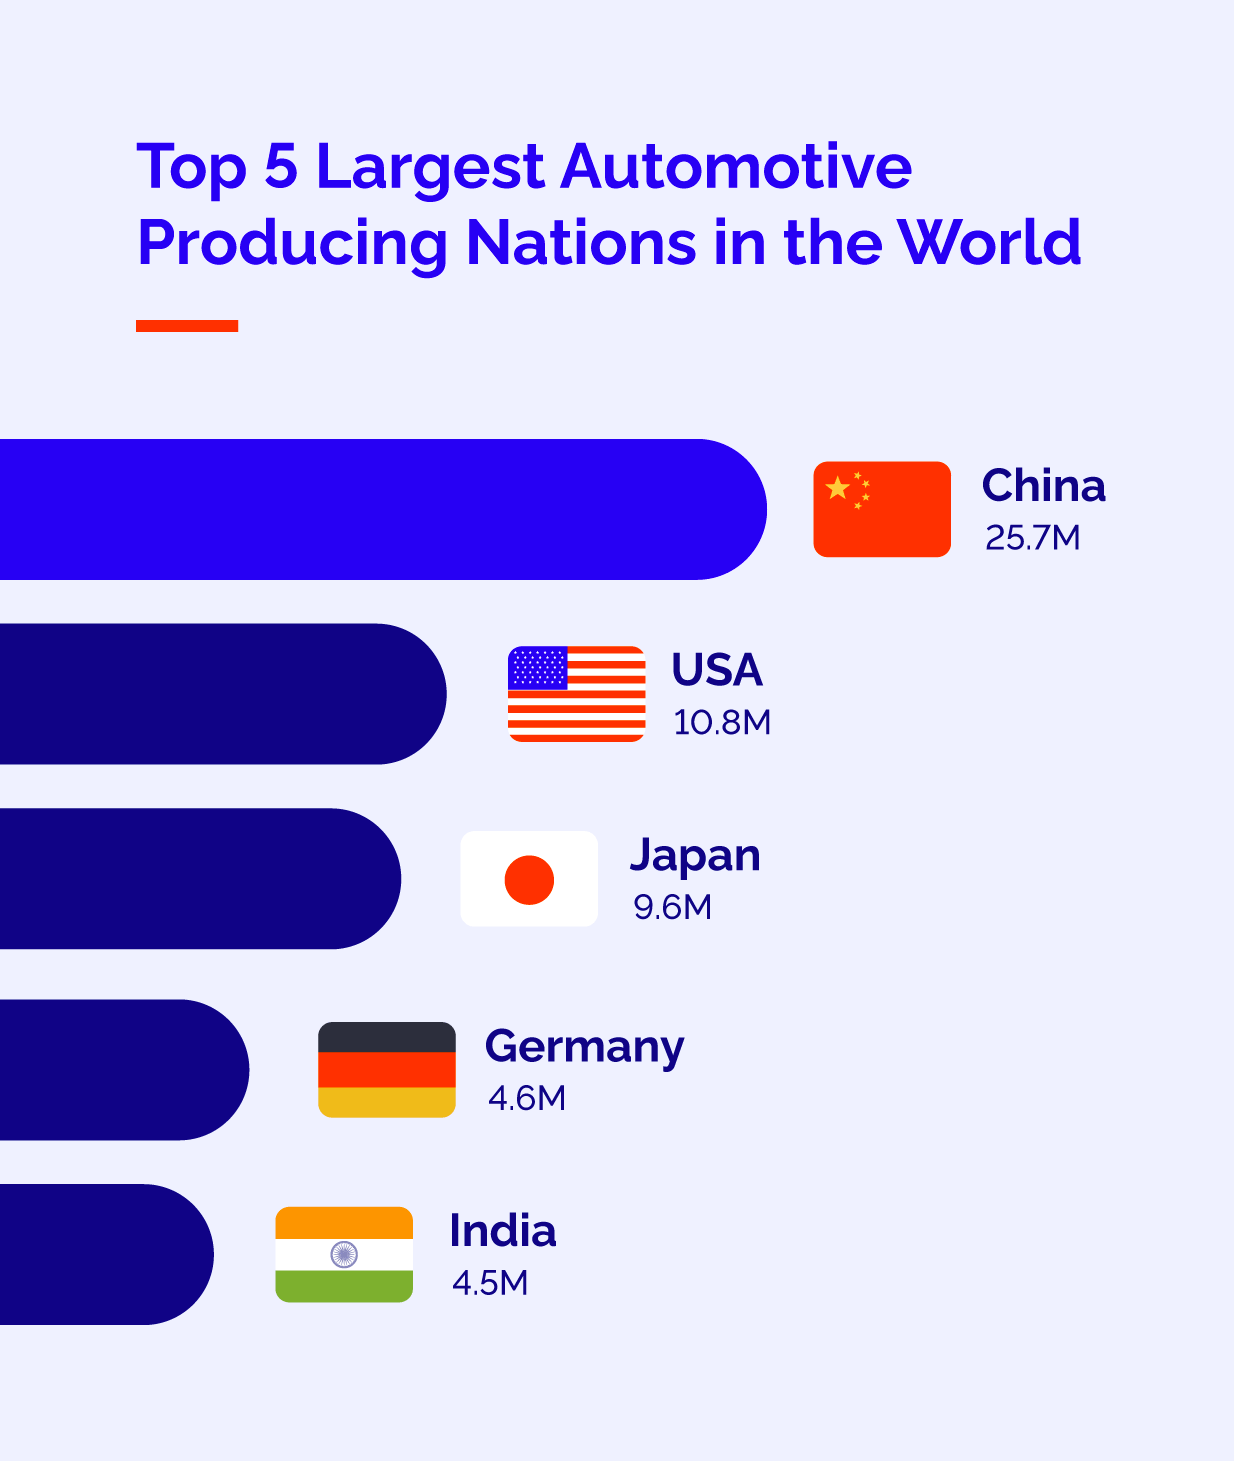 Top 5 Largest Automotive Producing Nations in the World